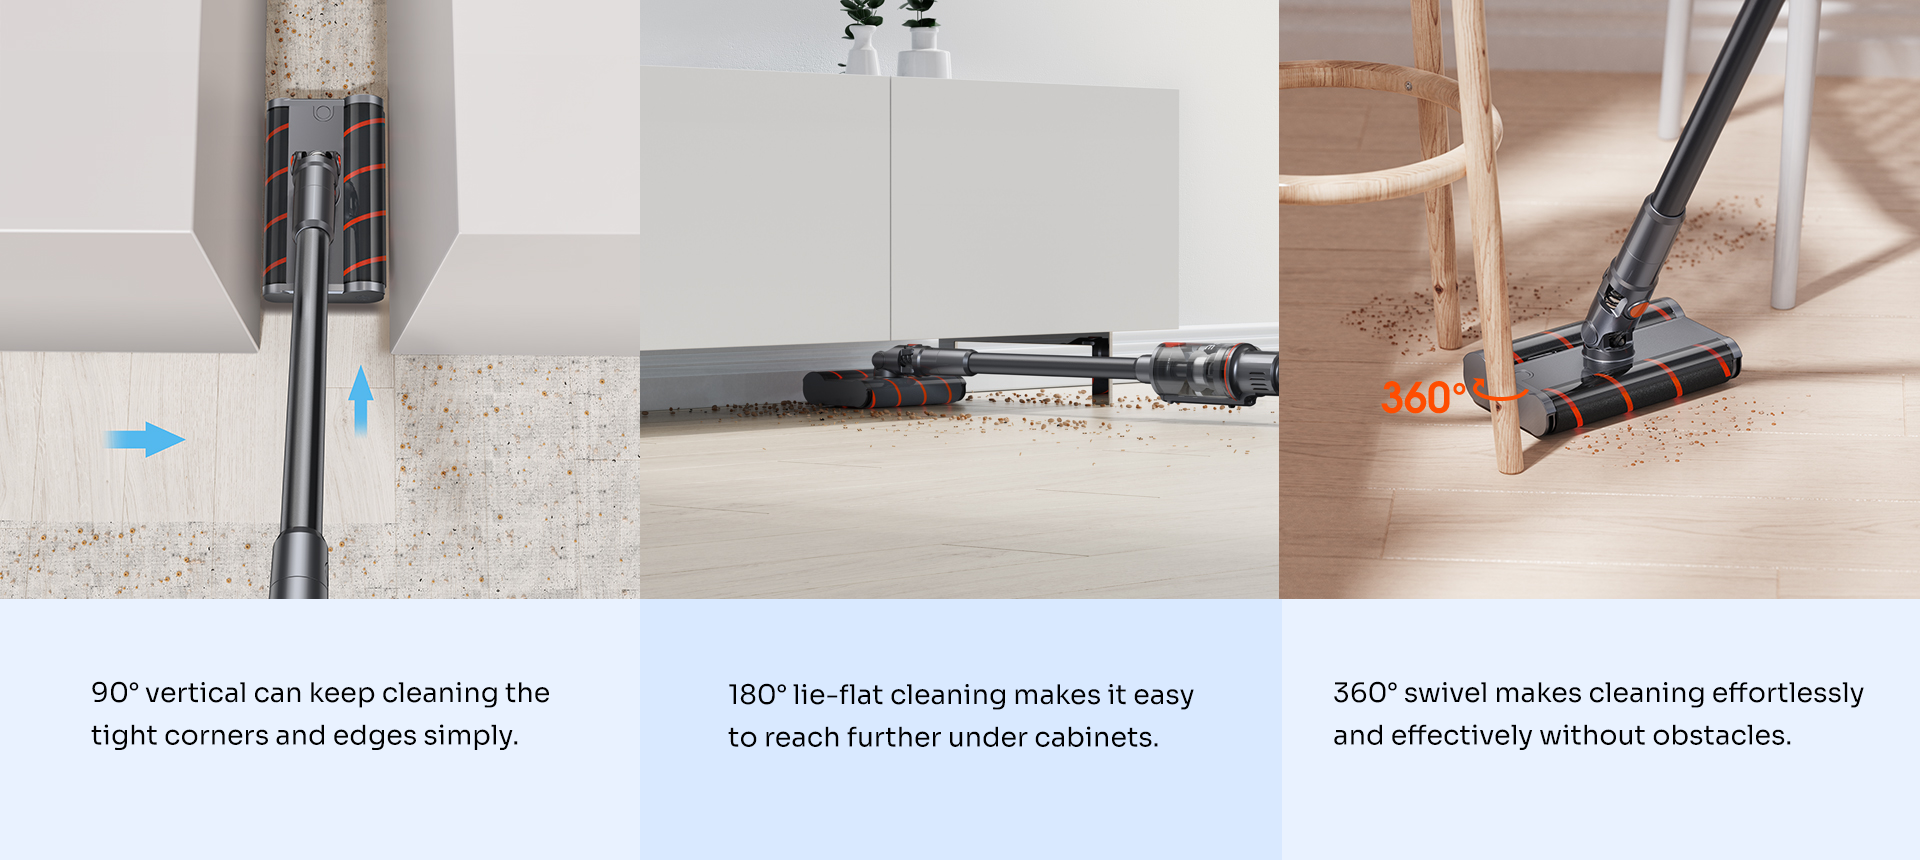 90, 180 and 360 degree cleaning capabilities